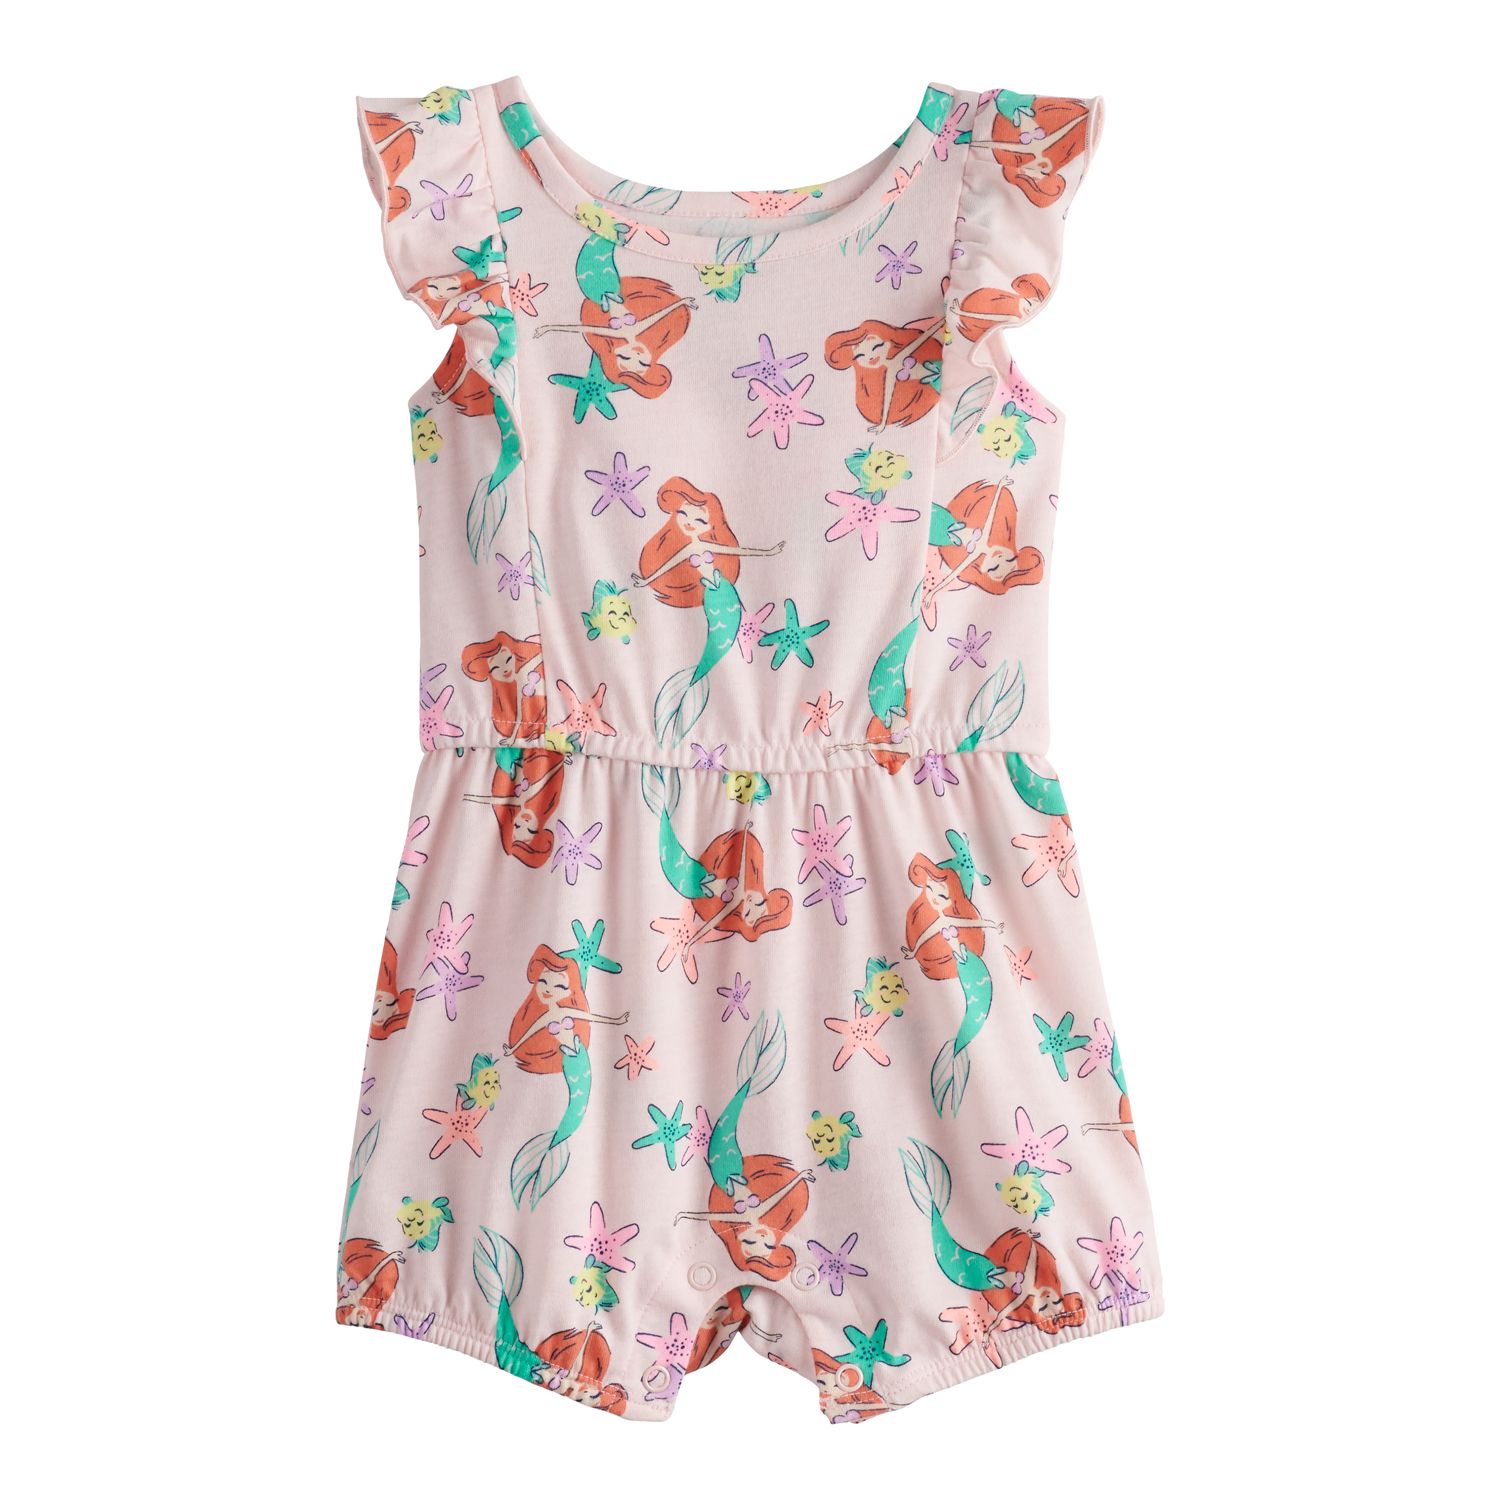 the little mermaid baby clothes